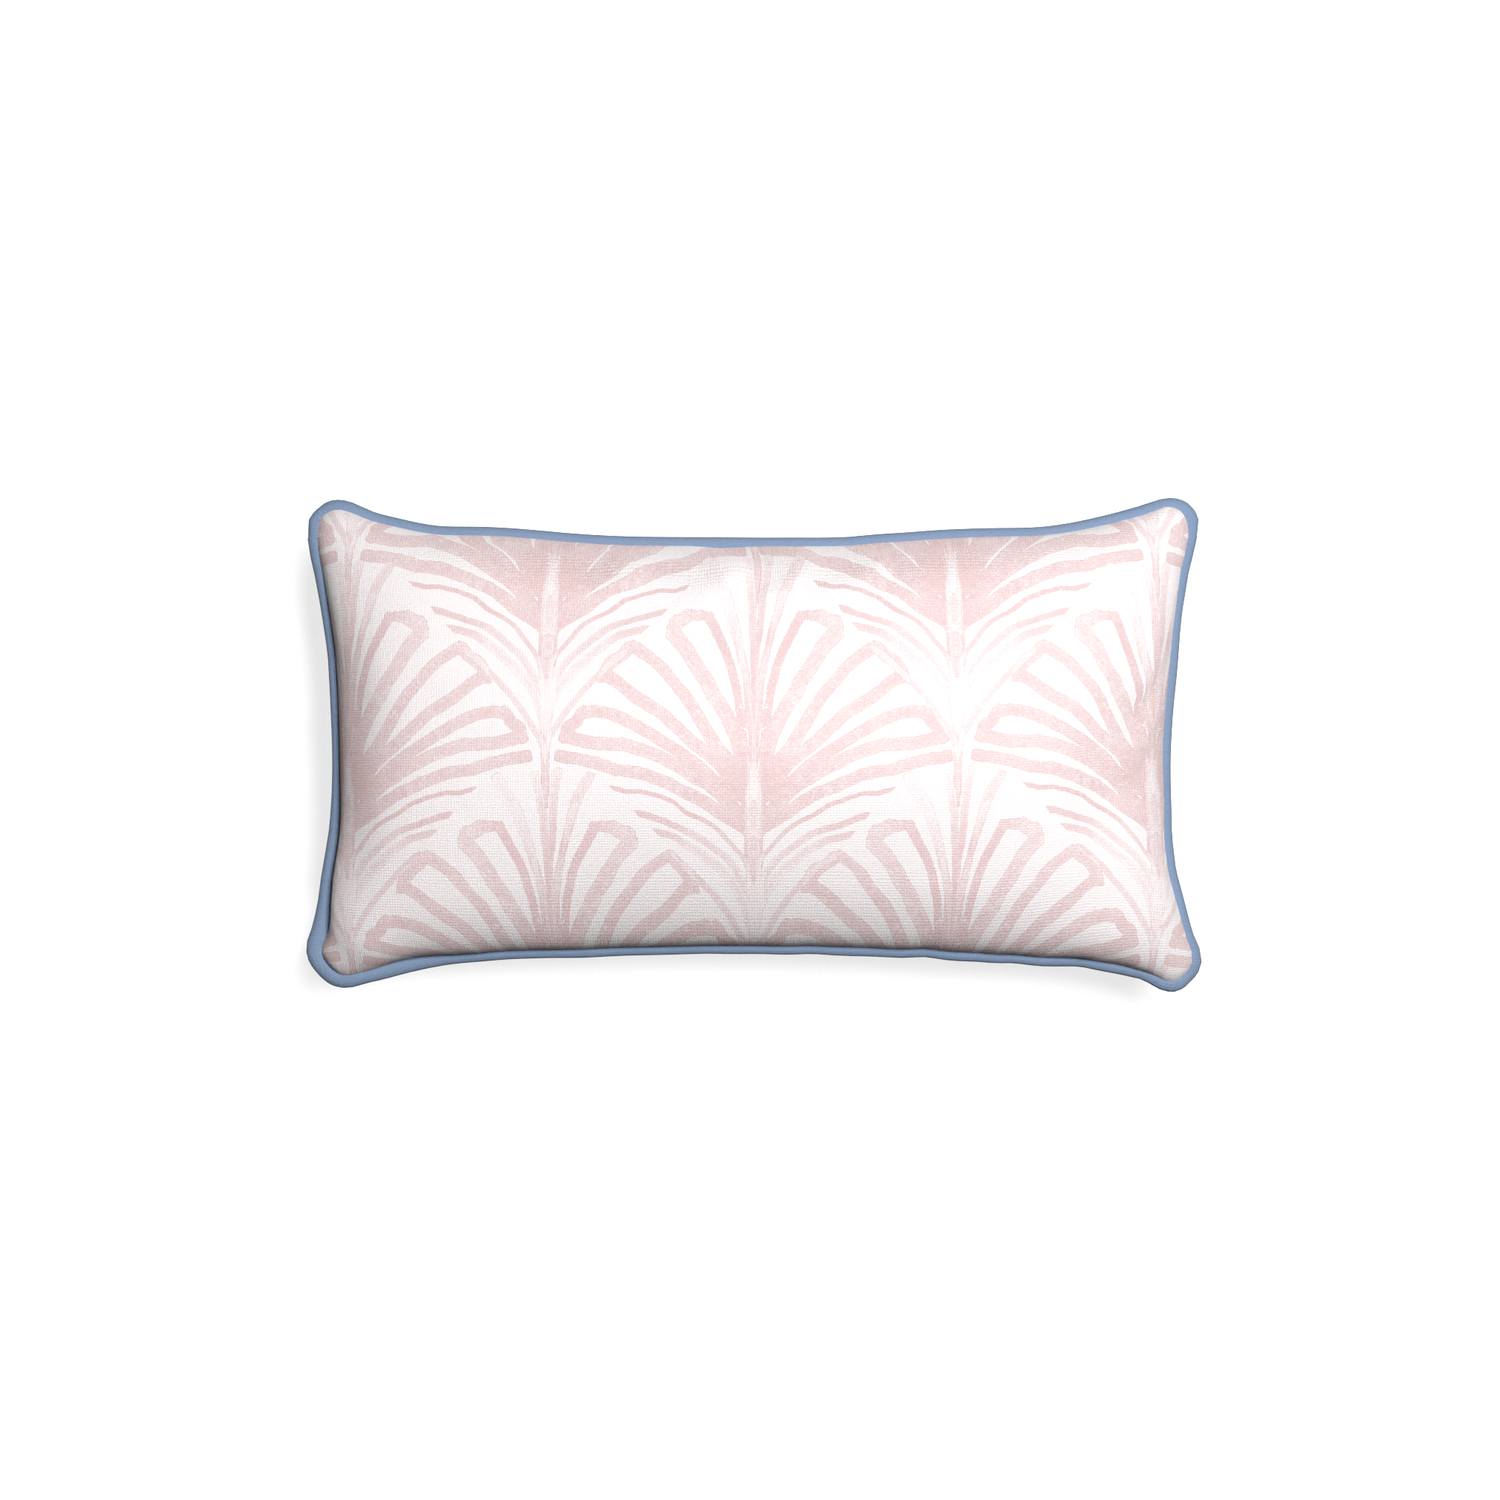 Petite-lumbar suzy rose custom rose pink palmpillow with sky piping on white background